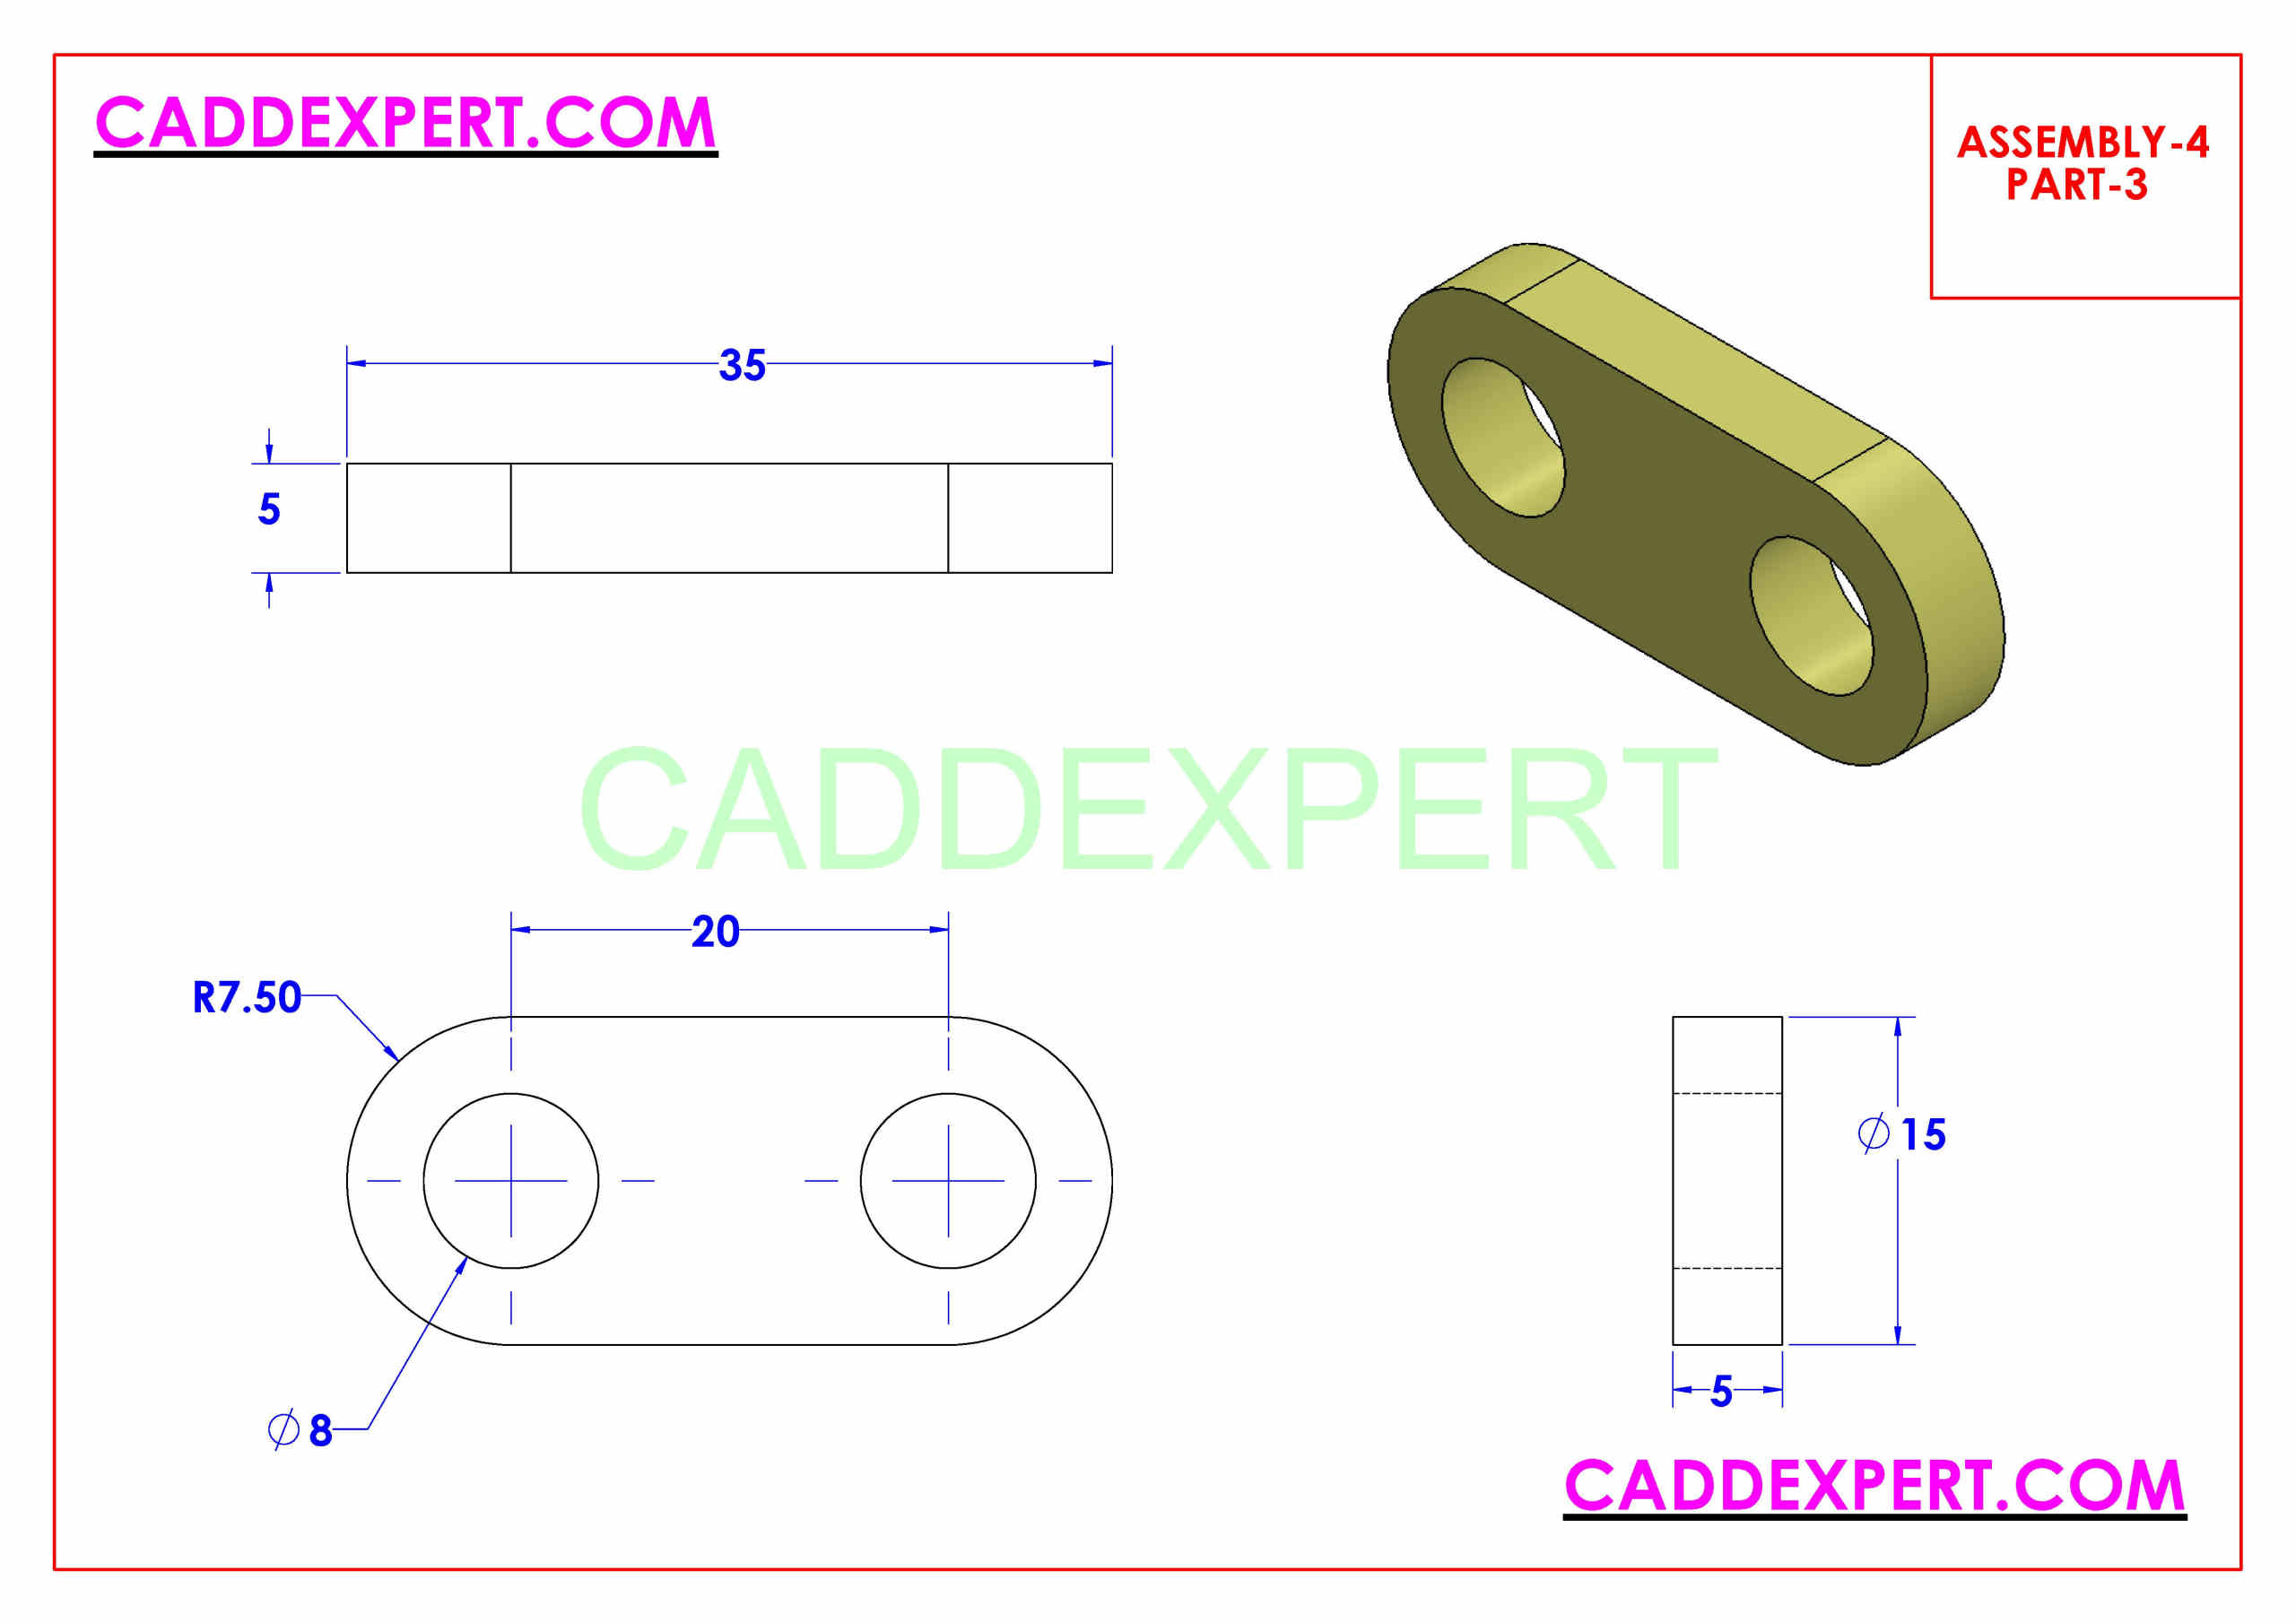 SOLIDWORKS ASSEMBLY DRAWING EXPLODED VIEW PART - 3